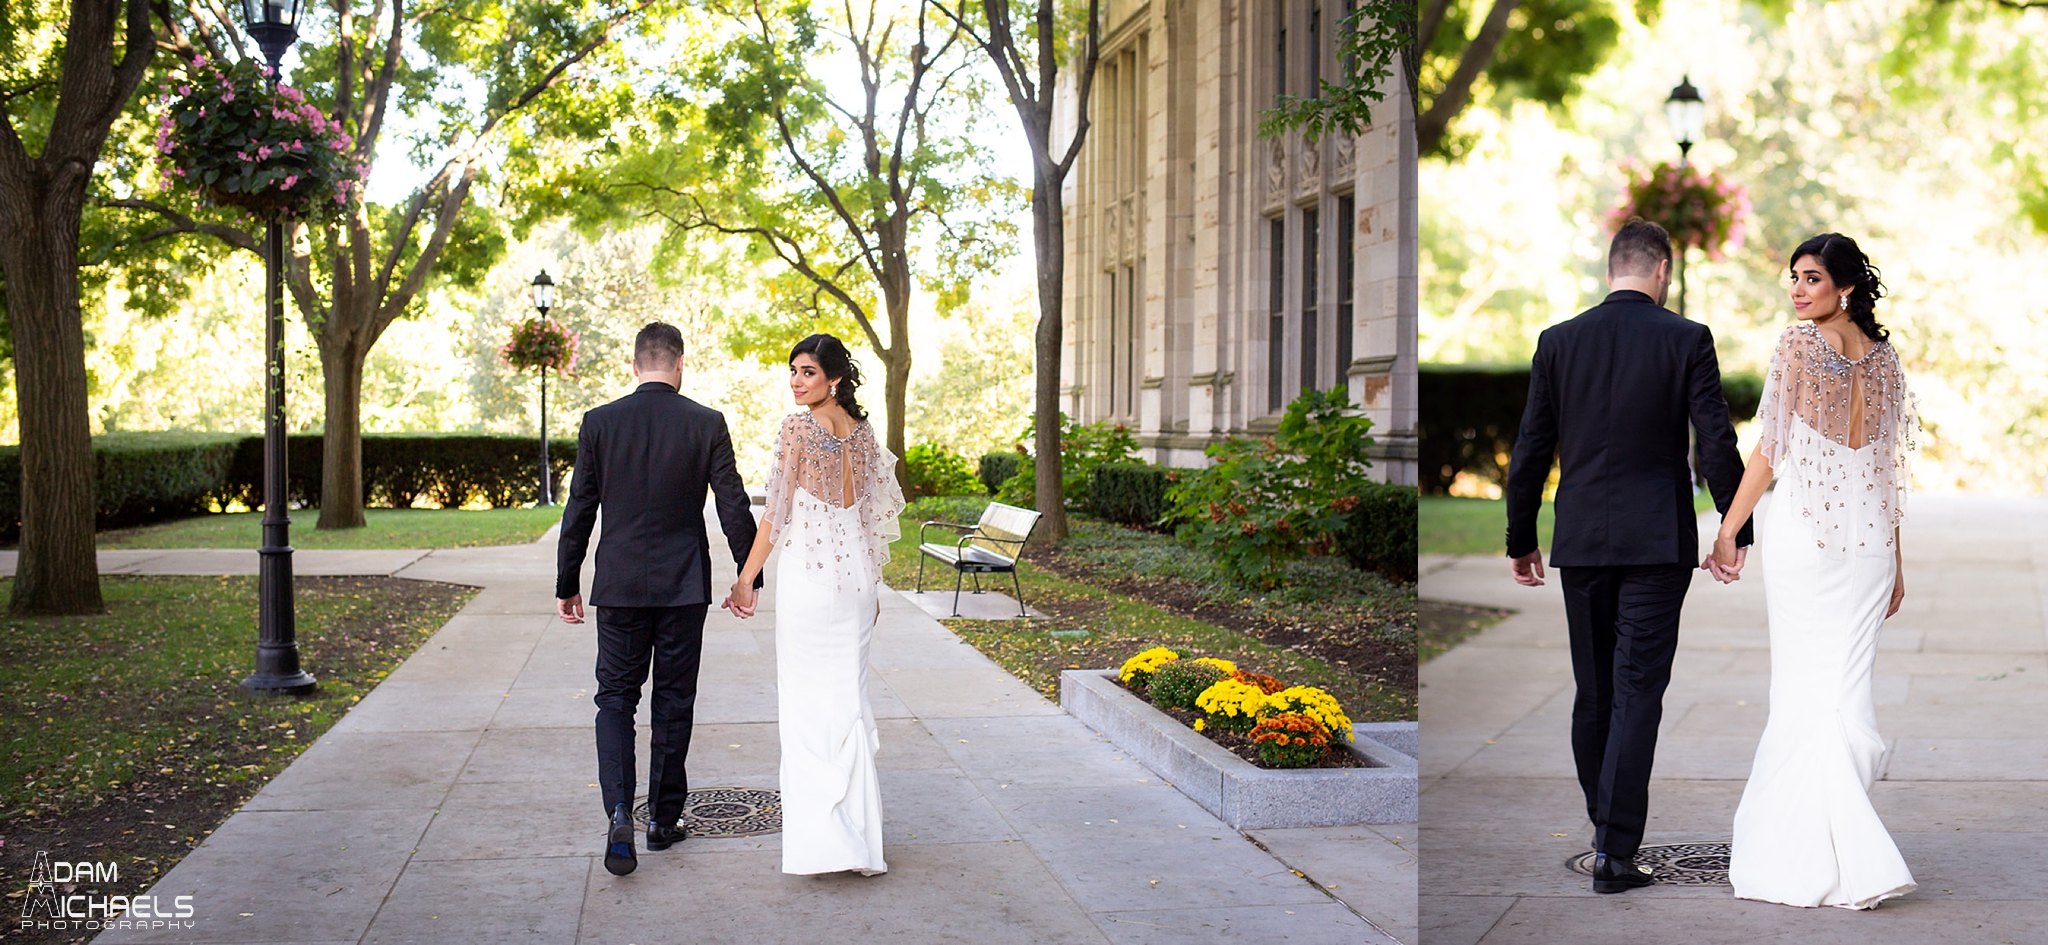 Cathederal of Learning Pittsburgh Wedding Portraits_0188.jpg